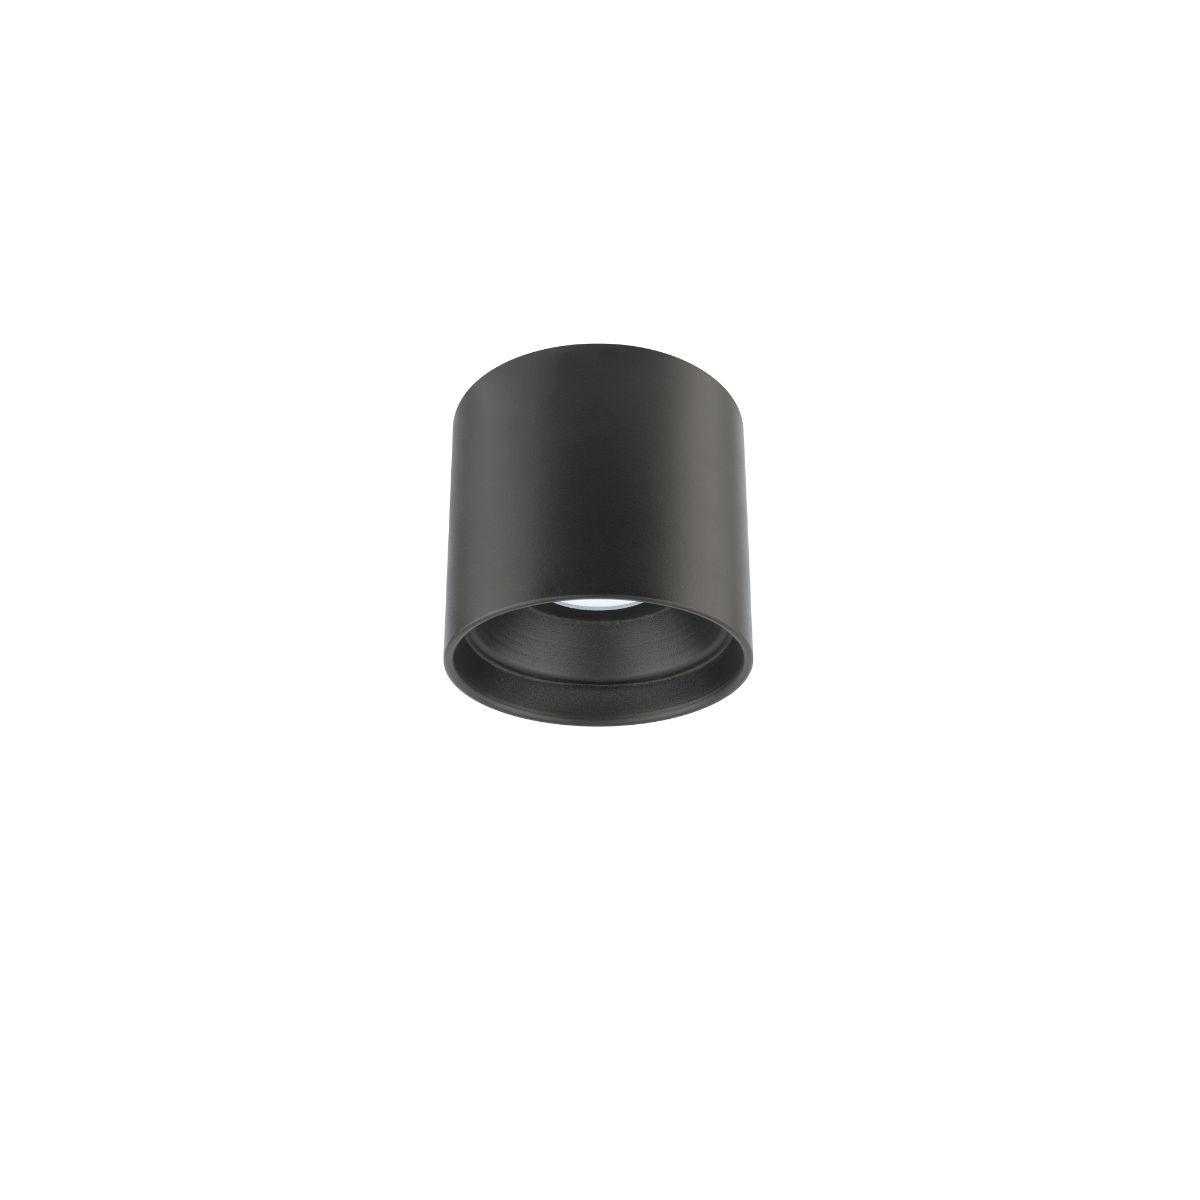 DOWNTOWN 5 in. LED Outdoor Flush Mount